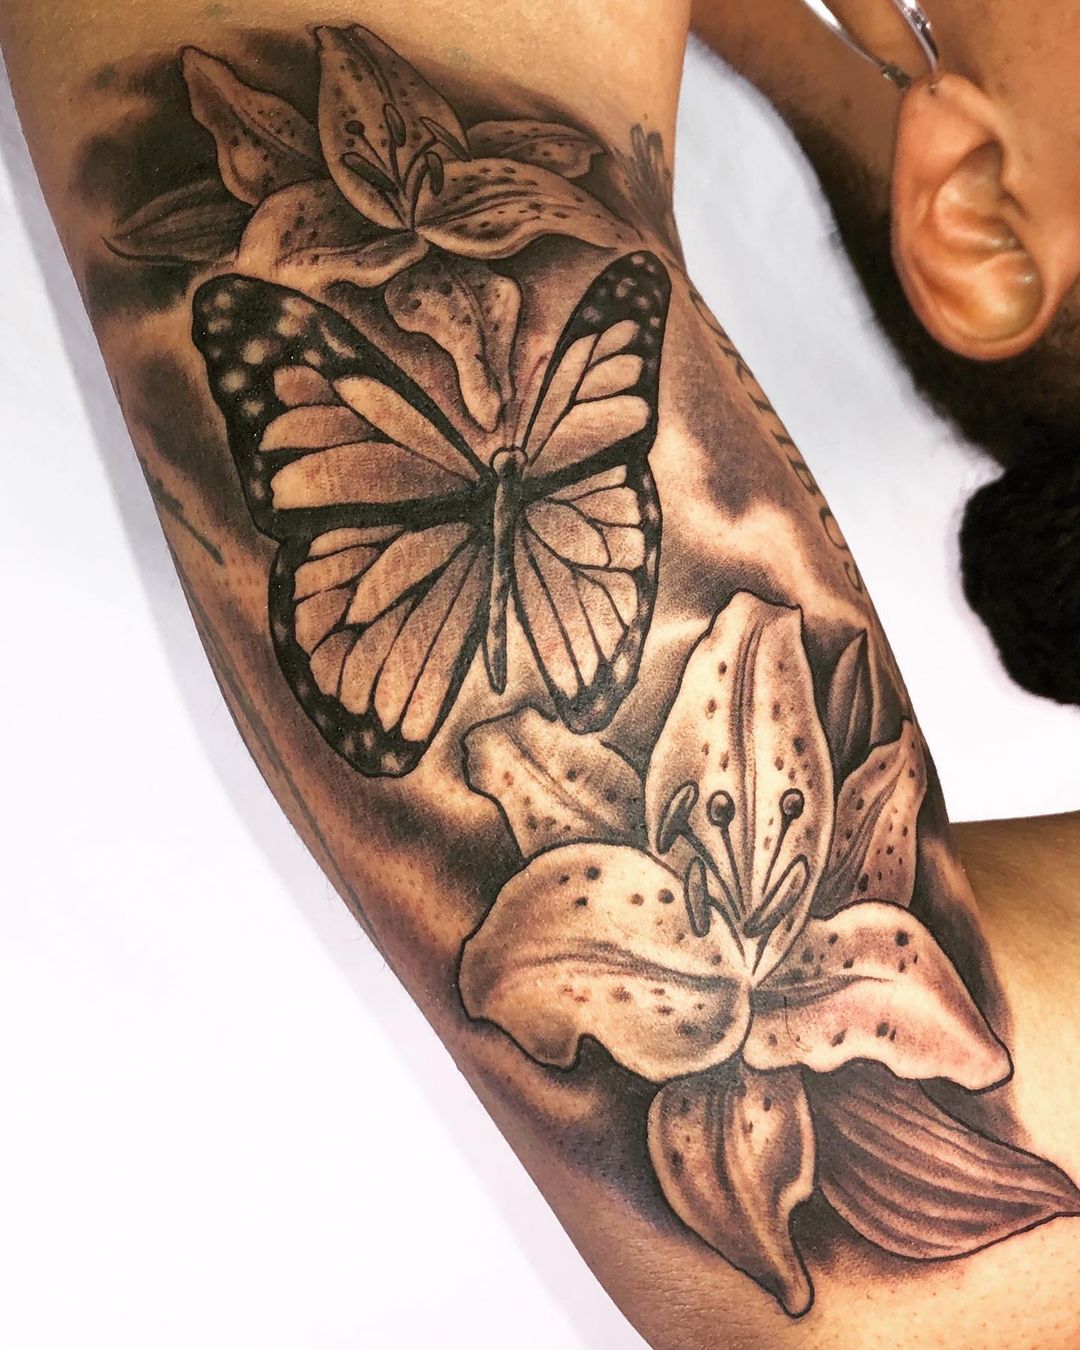 Black and white butterfly and flowers tattoo. Book a custom tattoo with Chris at Sacred Mandala Studio - Durham, NC.